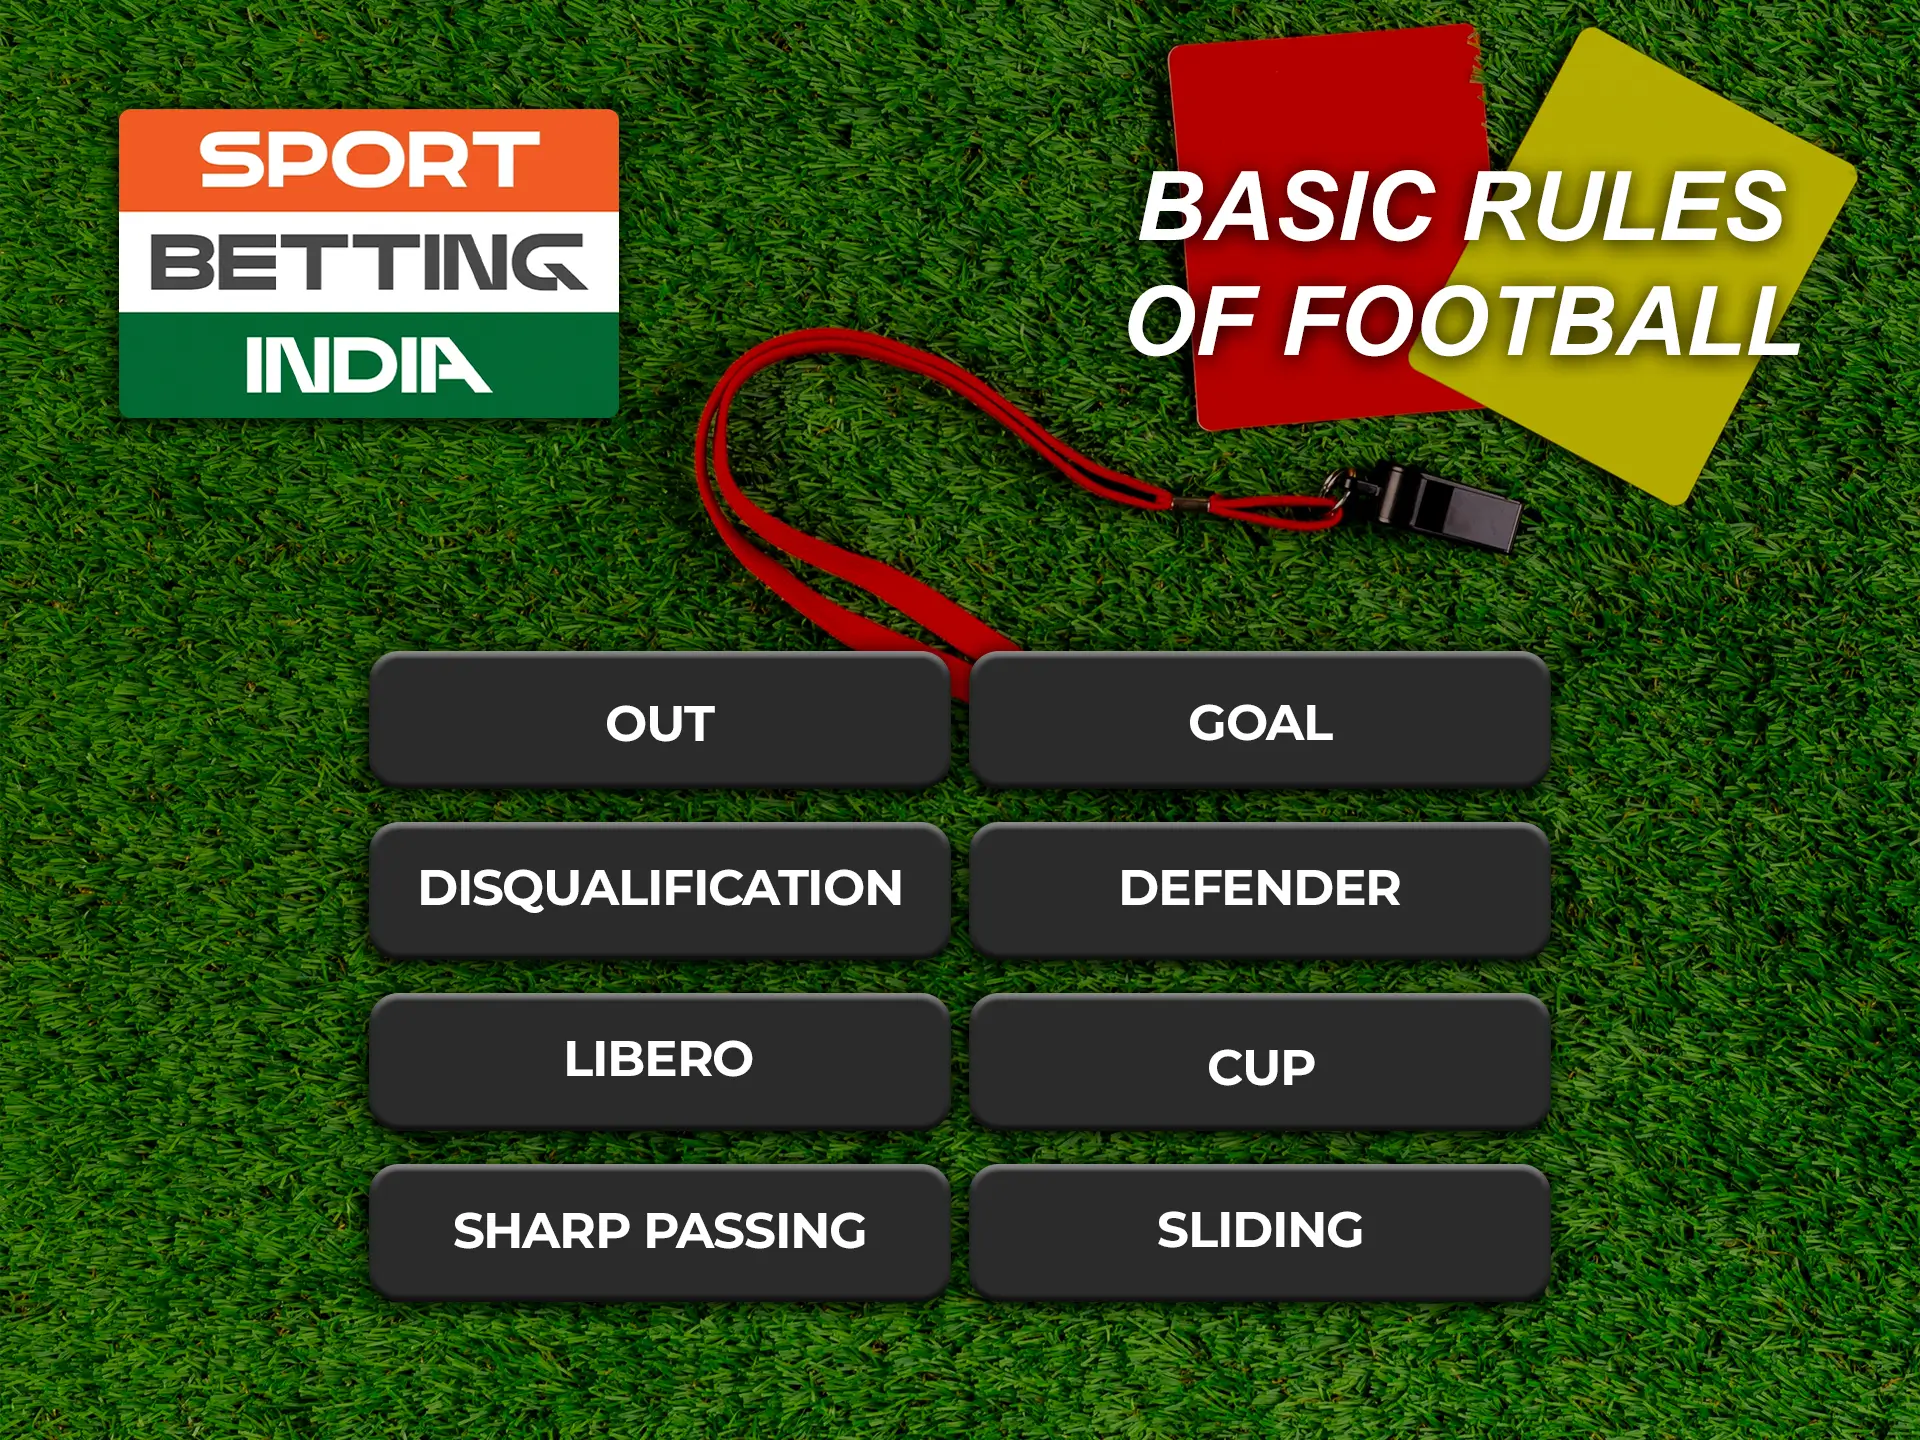 Find out more about the basic rules of football.